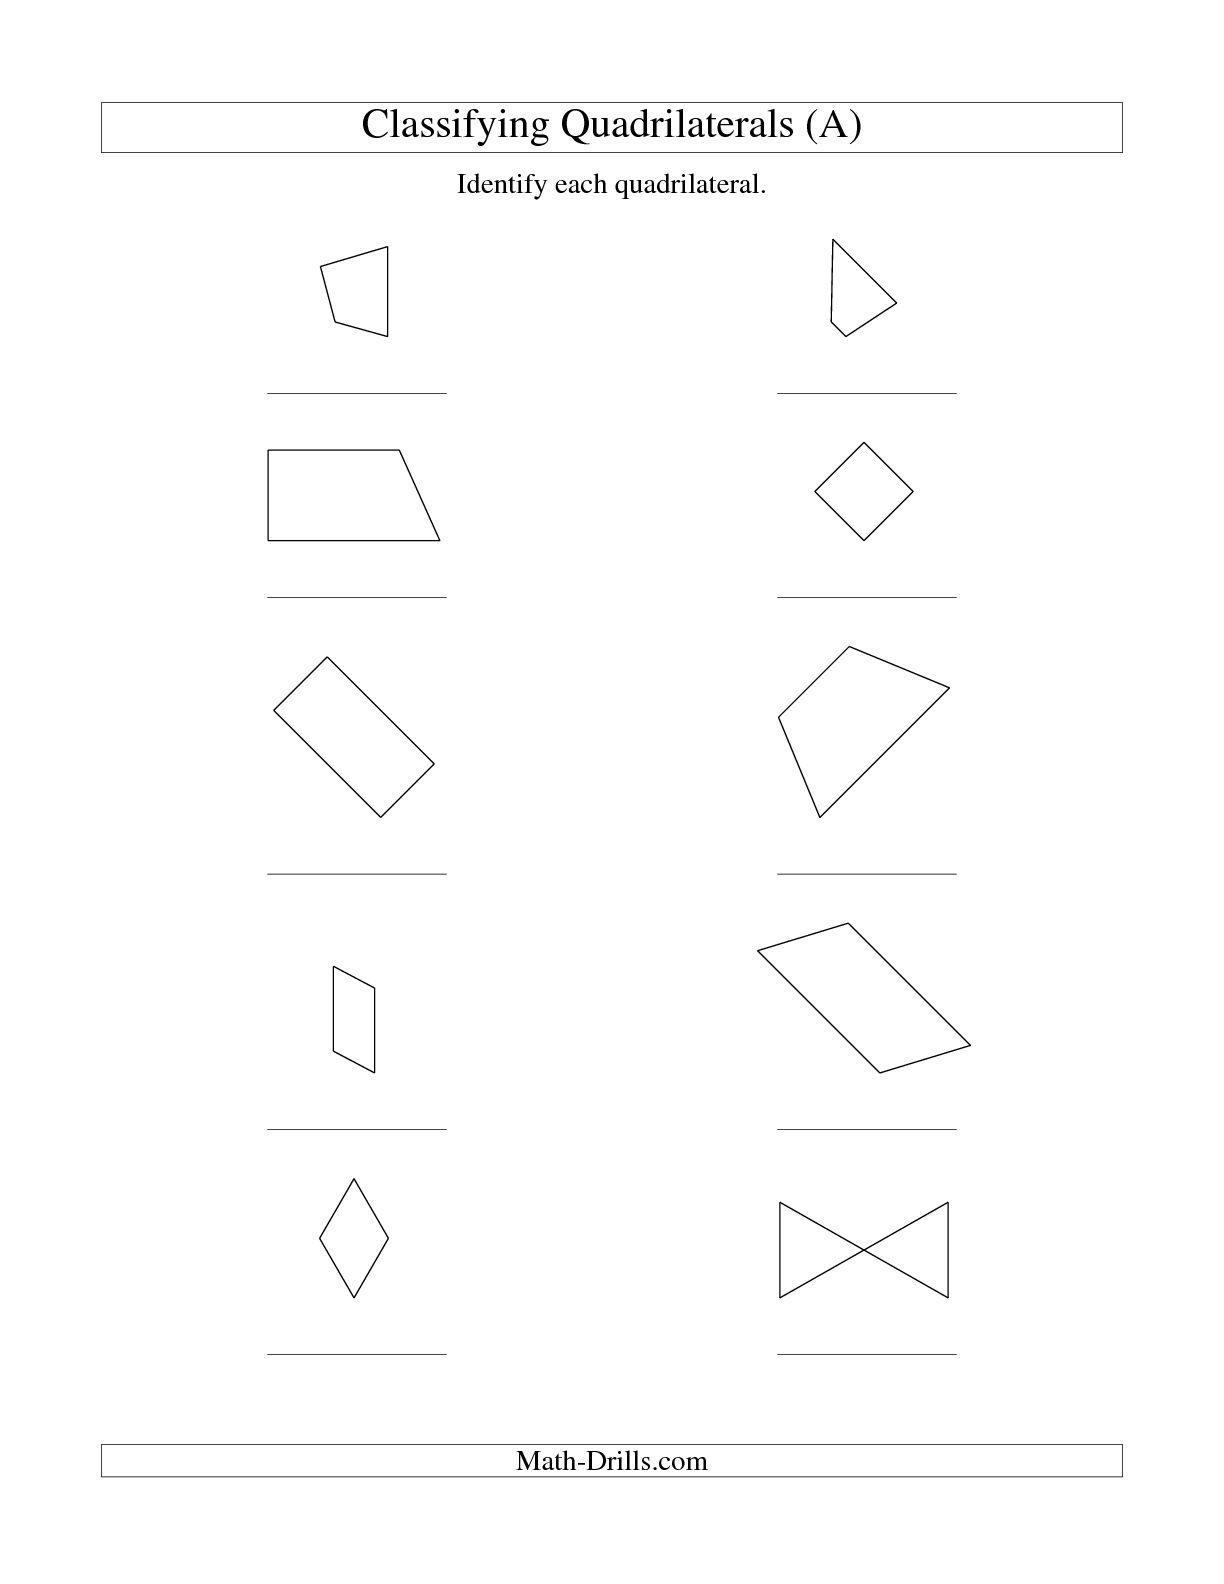 Quadrilateral Hierarchy Worksheets